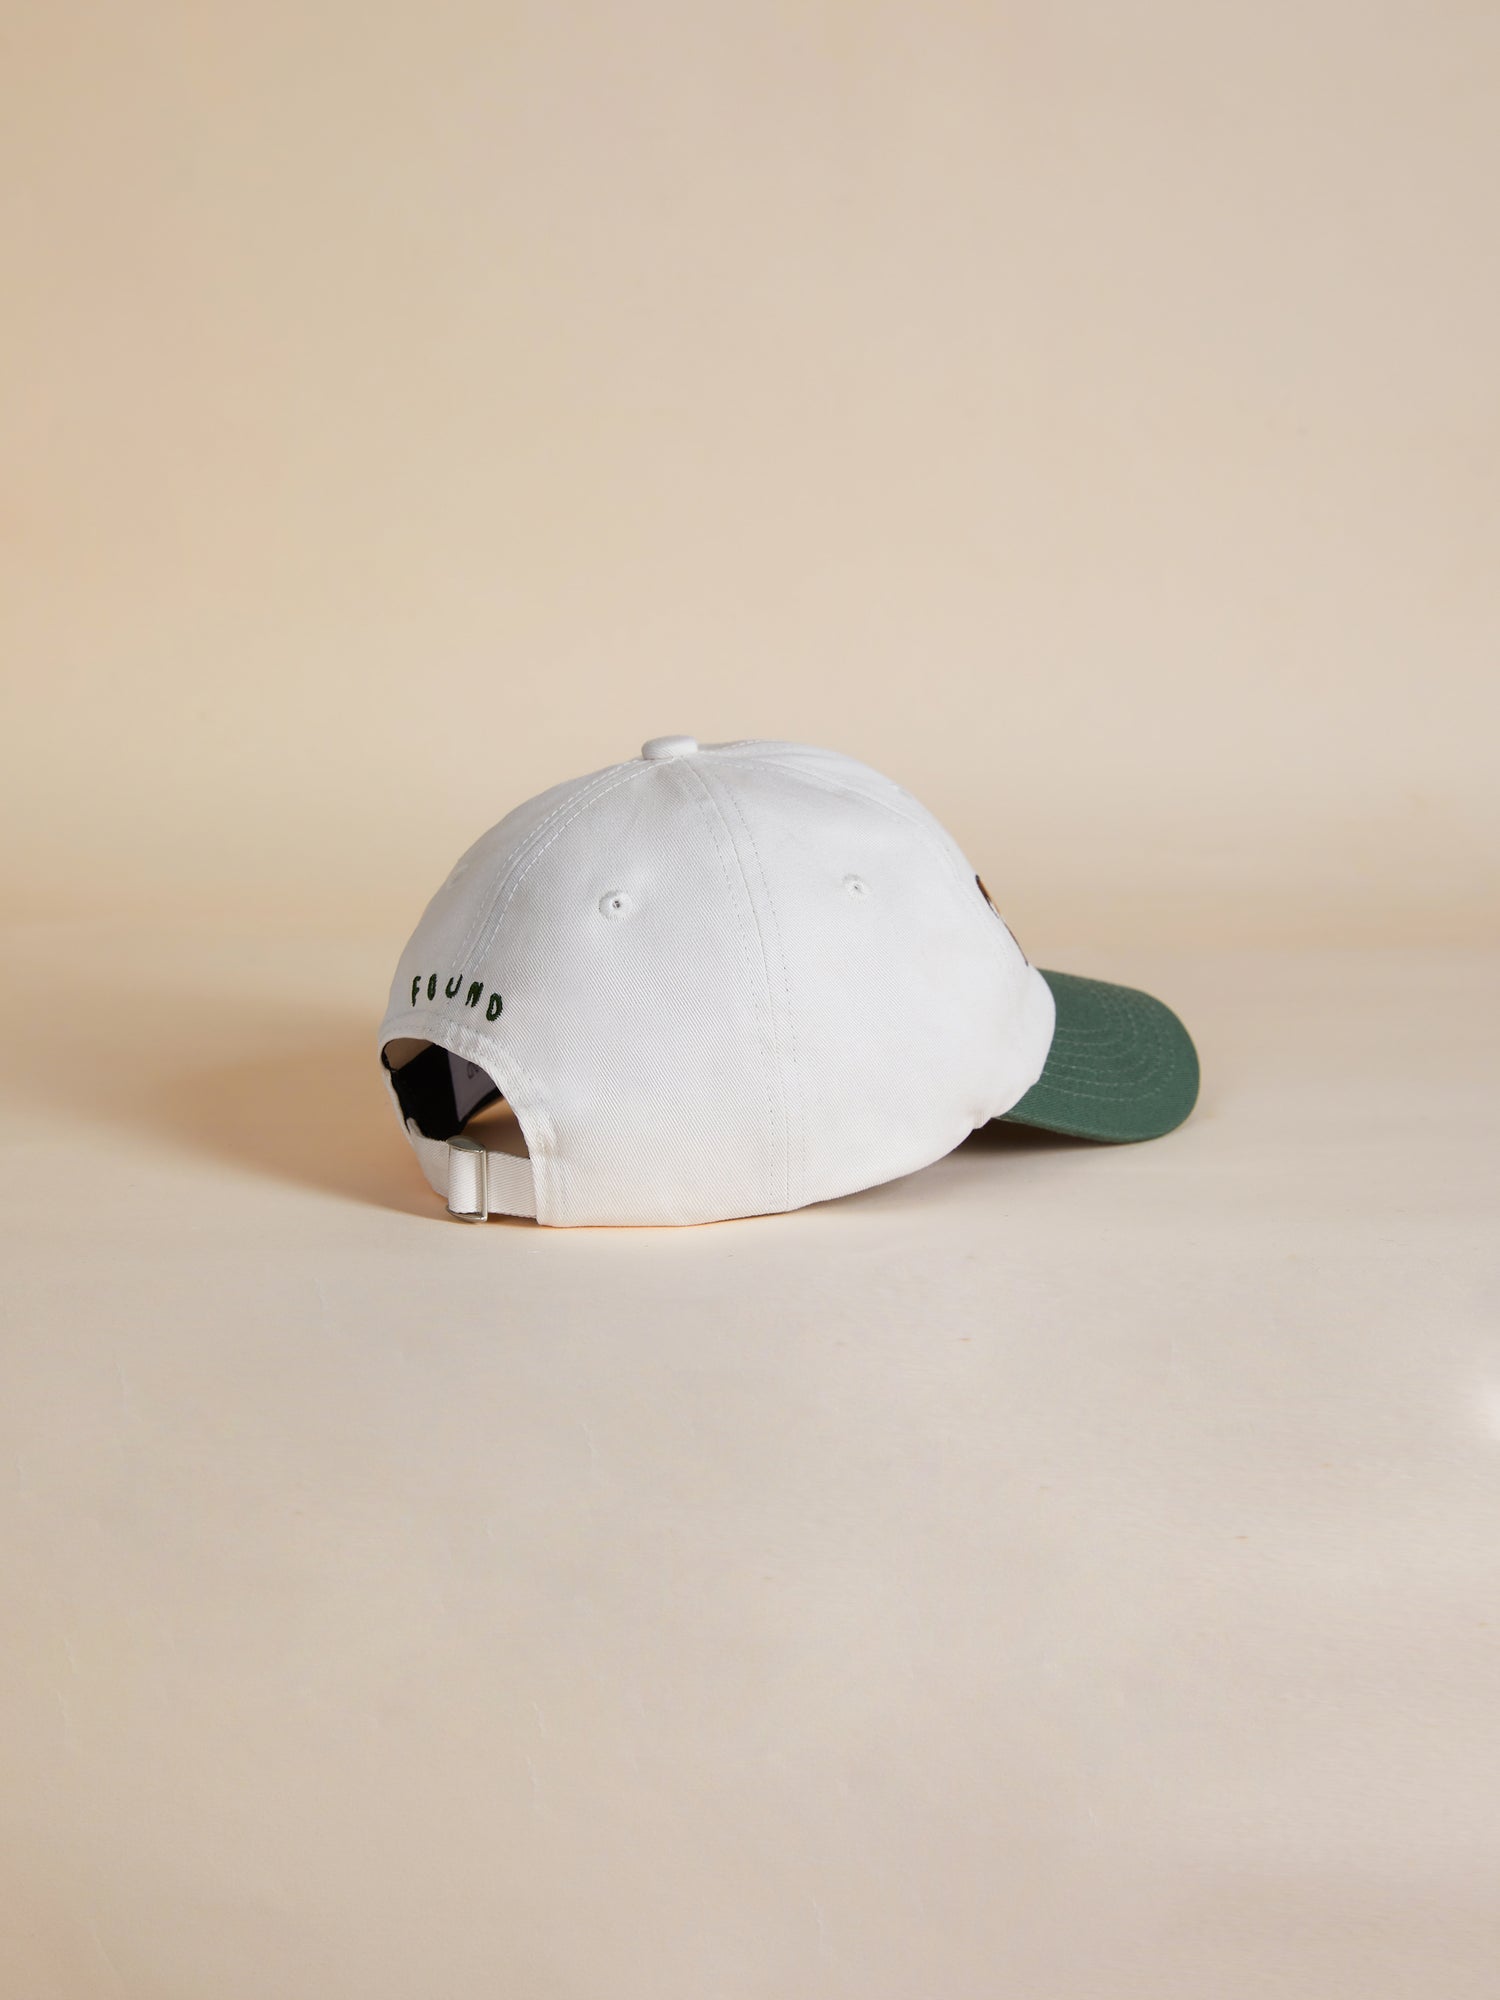 A white and green Horse Equine Cap by Found on a beige surface.